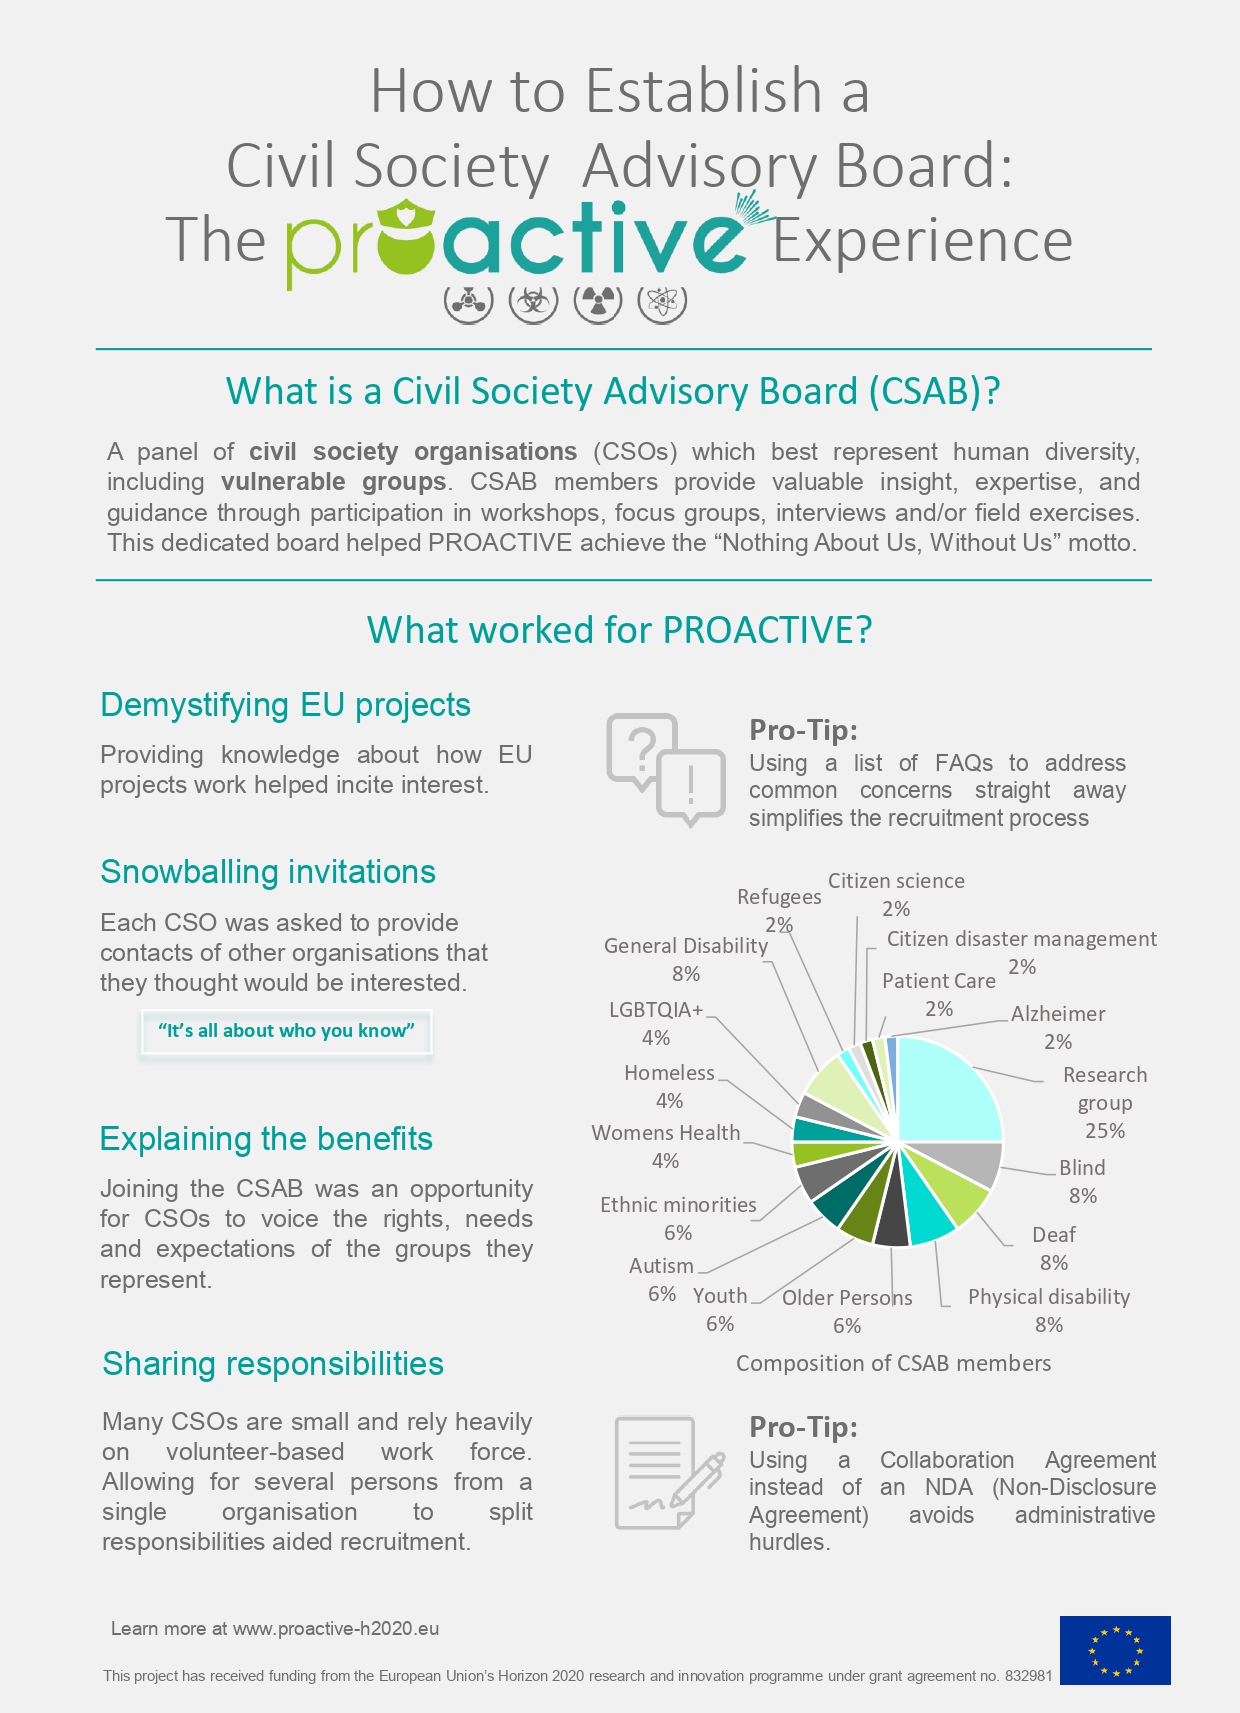 PROACTIVE flyer on How to Recruit for a Civil Society Advisory Board. Flyer starts with explanation of what is a Civil Society Advisory Board. The it follows with heading "What worked for PROACTIVE". Then there are four sub headings: Demystifying EU projects, Snowballing invitations, Explaining the benefits, Sharing responsibilities. Also, there is a pie chart which illustrates the percentage of PROACTIVE SCAB members. There are Pro-tips above and below of the pie chart. 